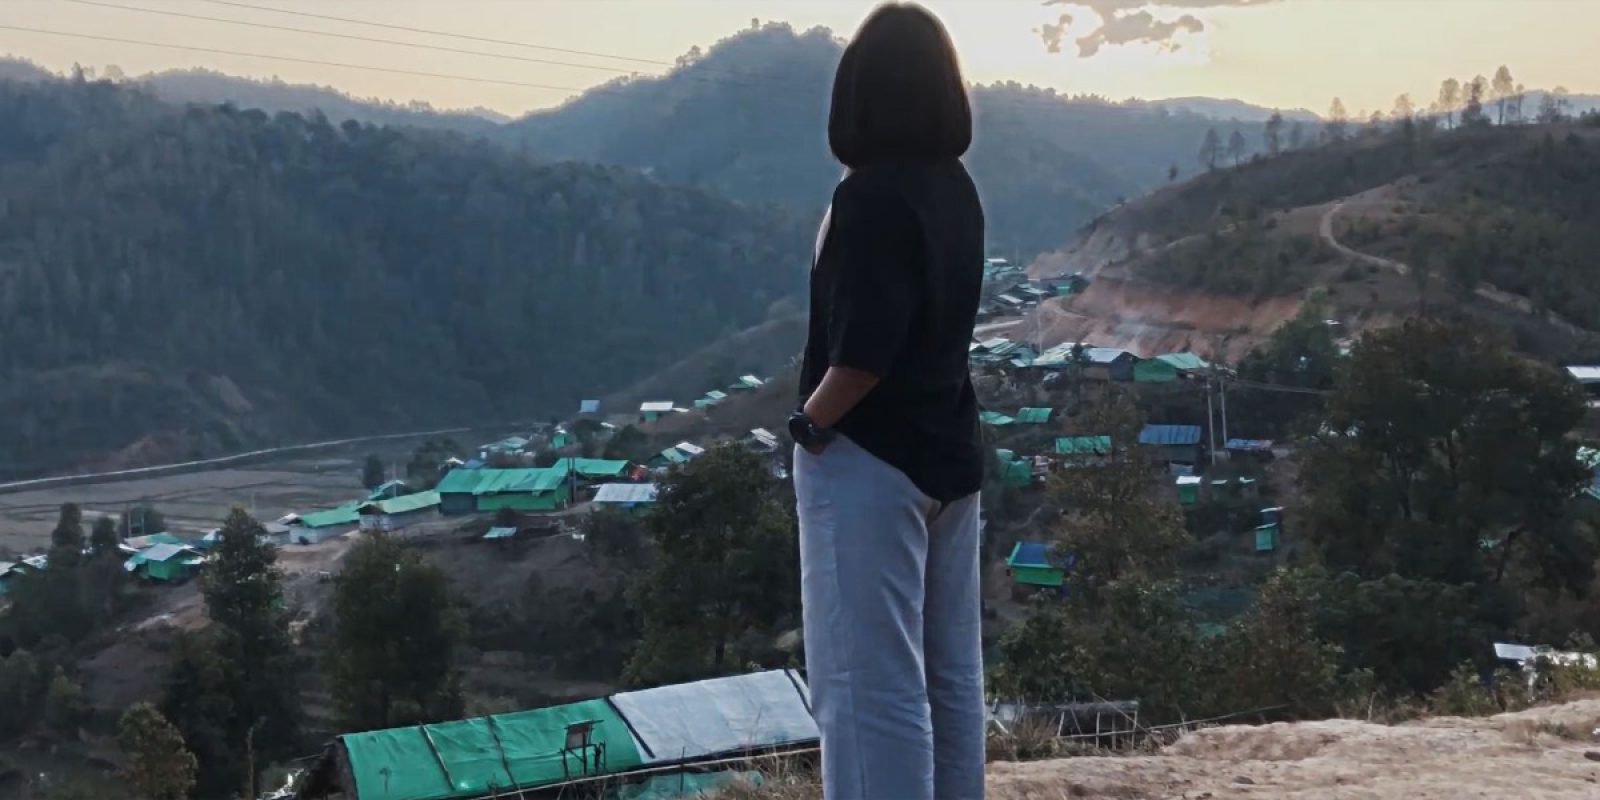 “Echoes of displacement” is a video series about the daily life, dreams, and hopes of school-age girls displaced in Myanmar. A girl living in an IDP camp in Myanmar (Jesuit Refugee Service)